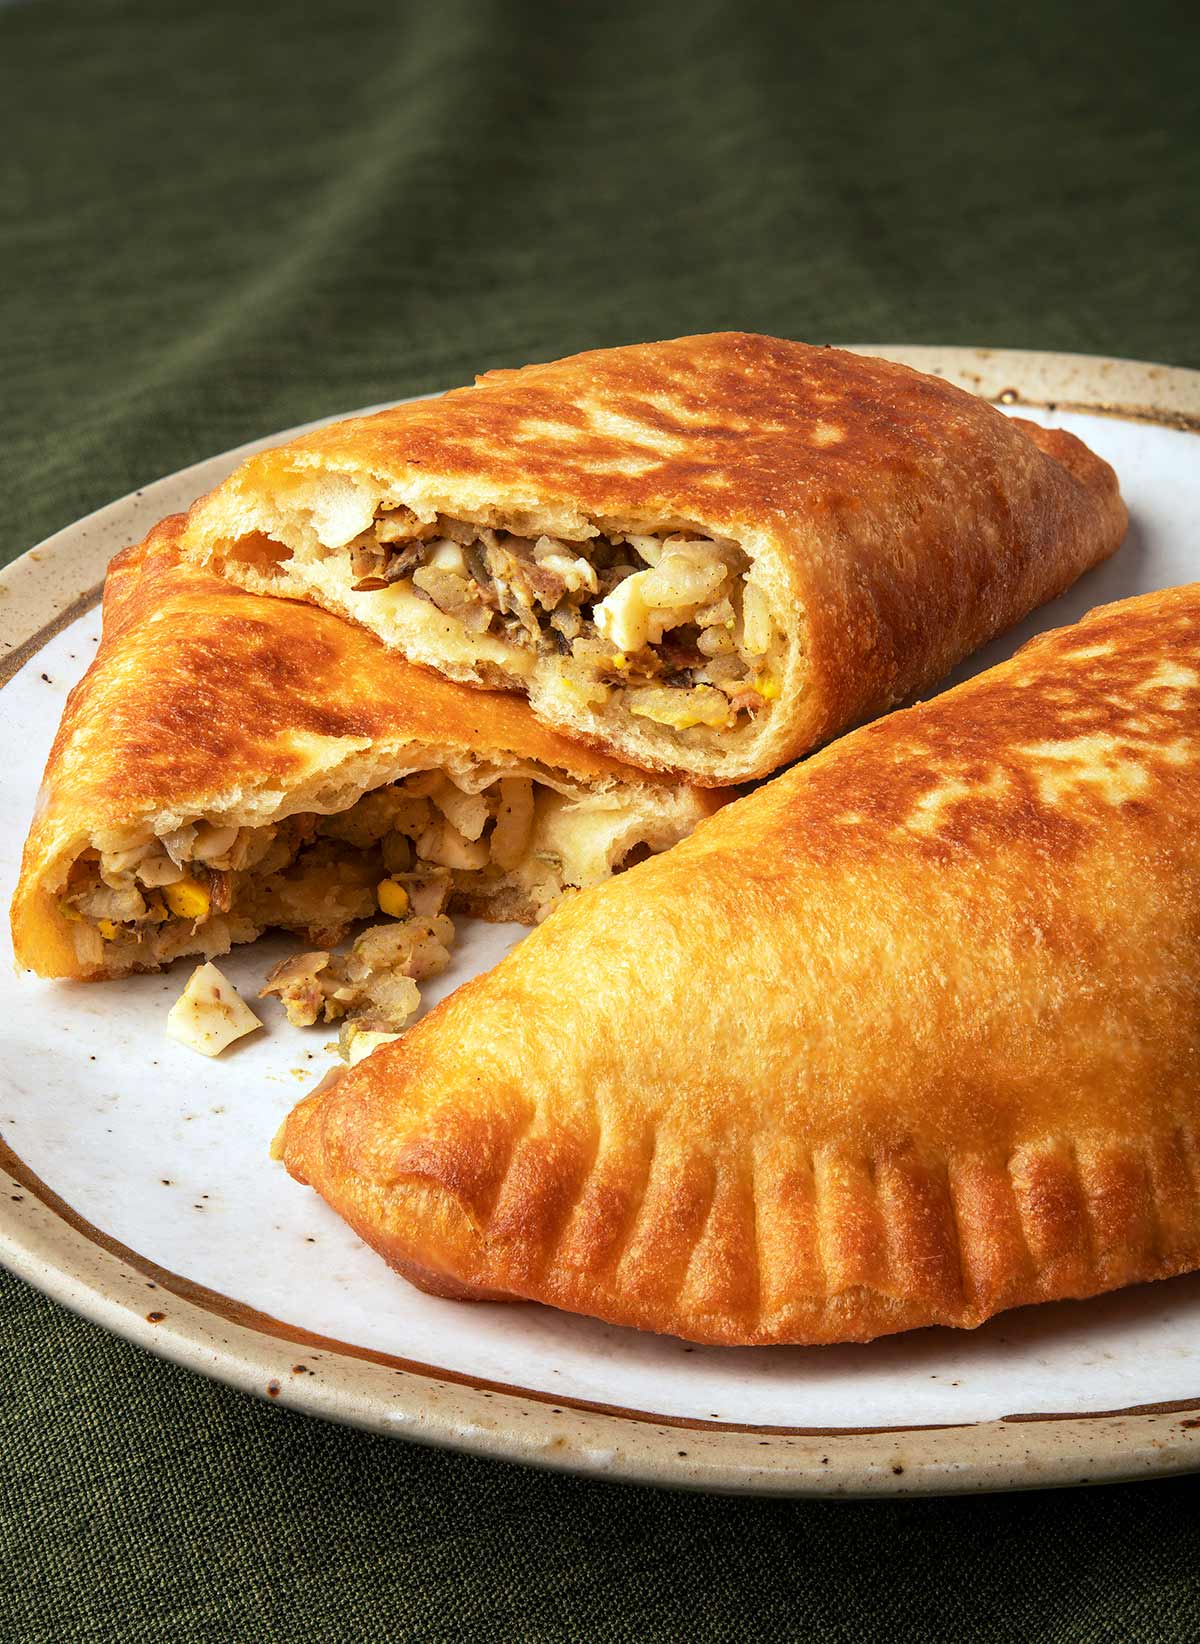 Two lihapiirakka, Finnish meat pies, on a plate with one broken open. 